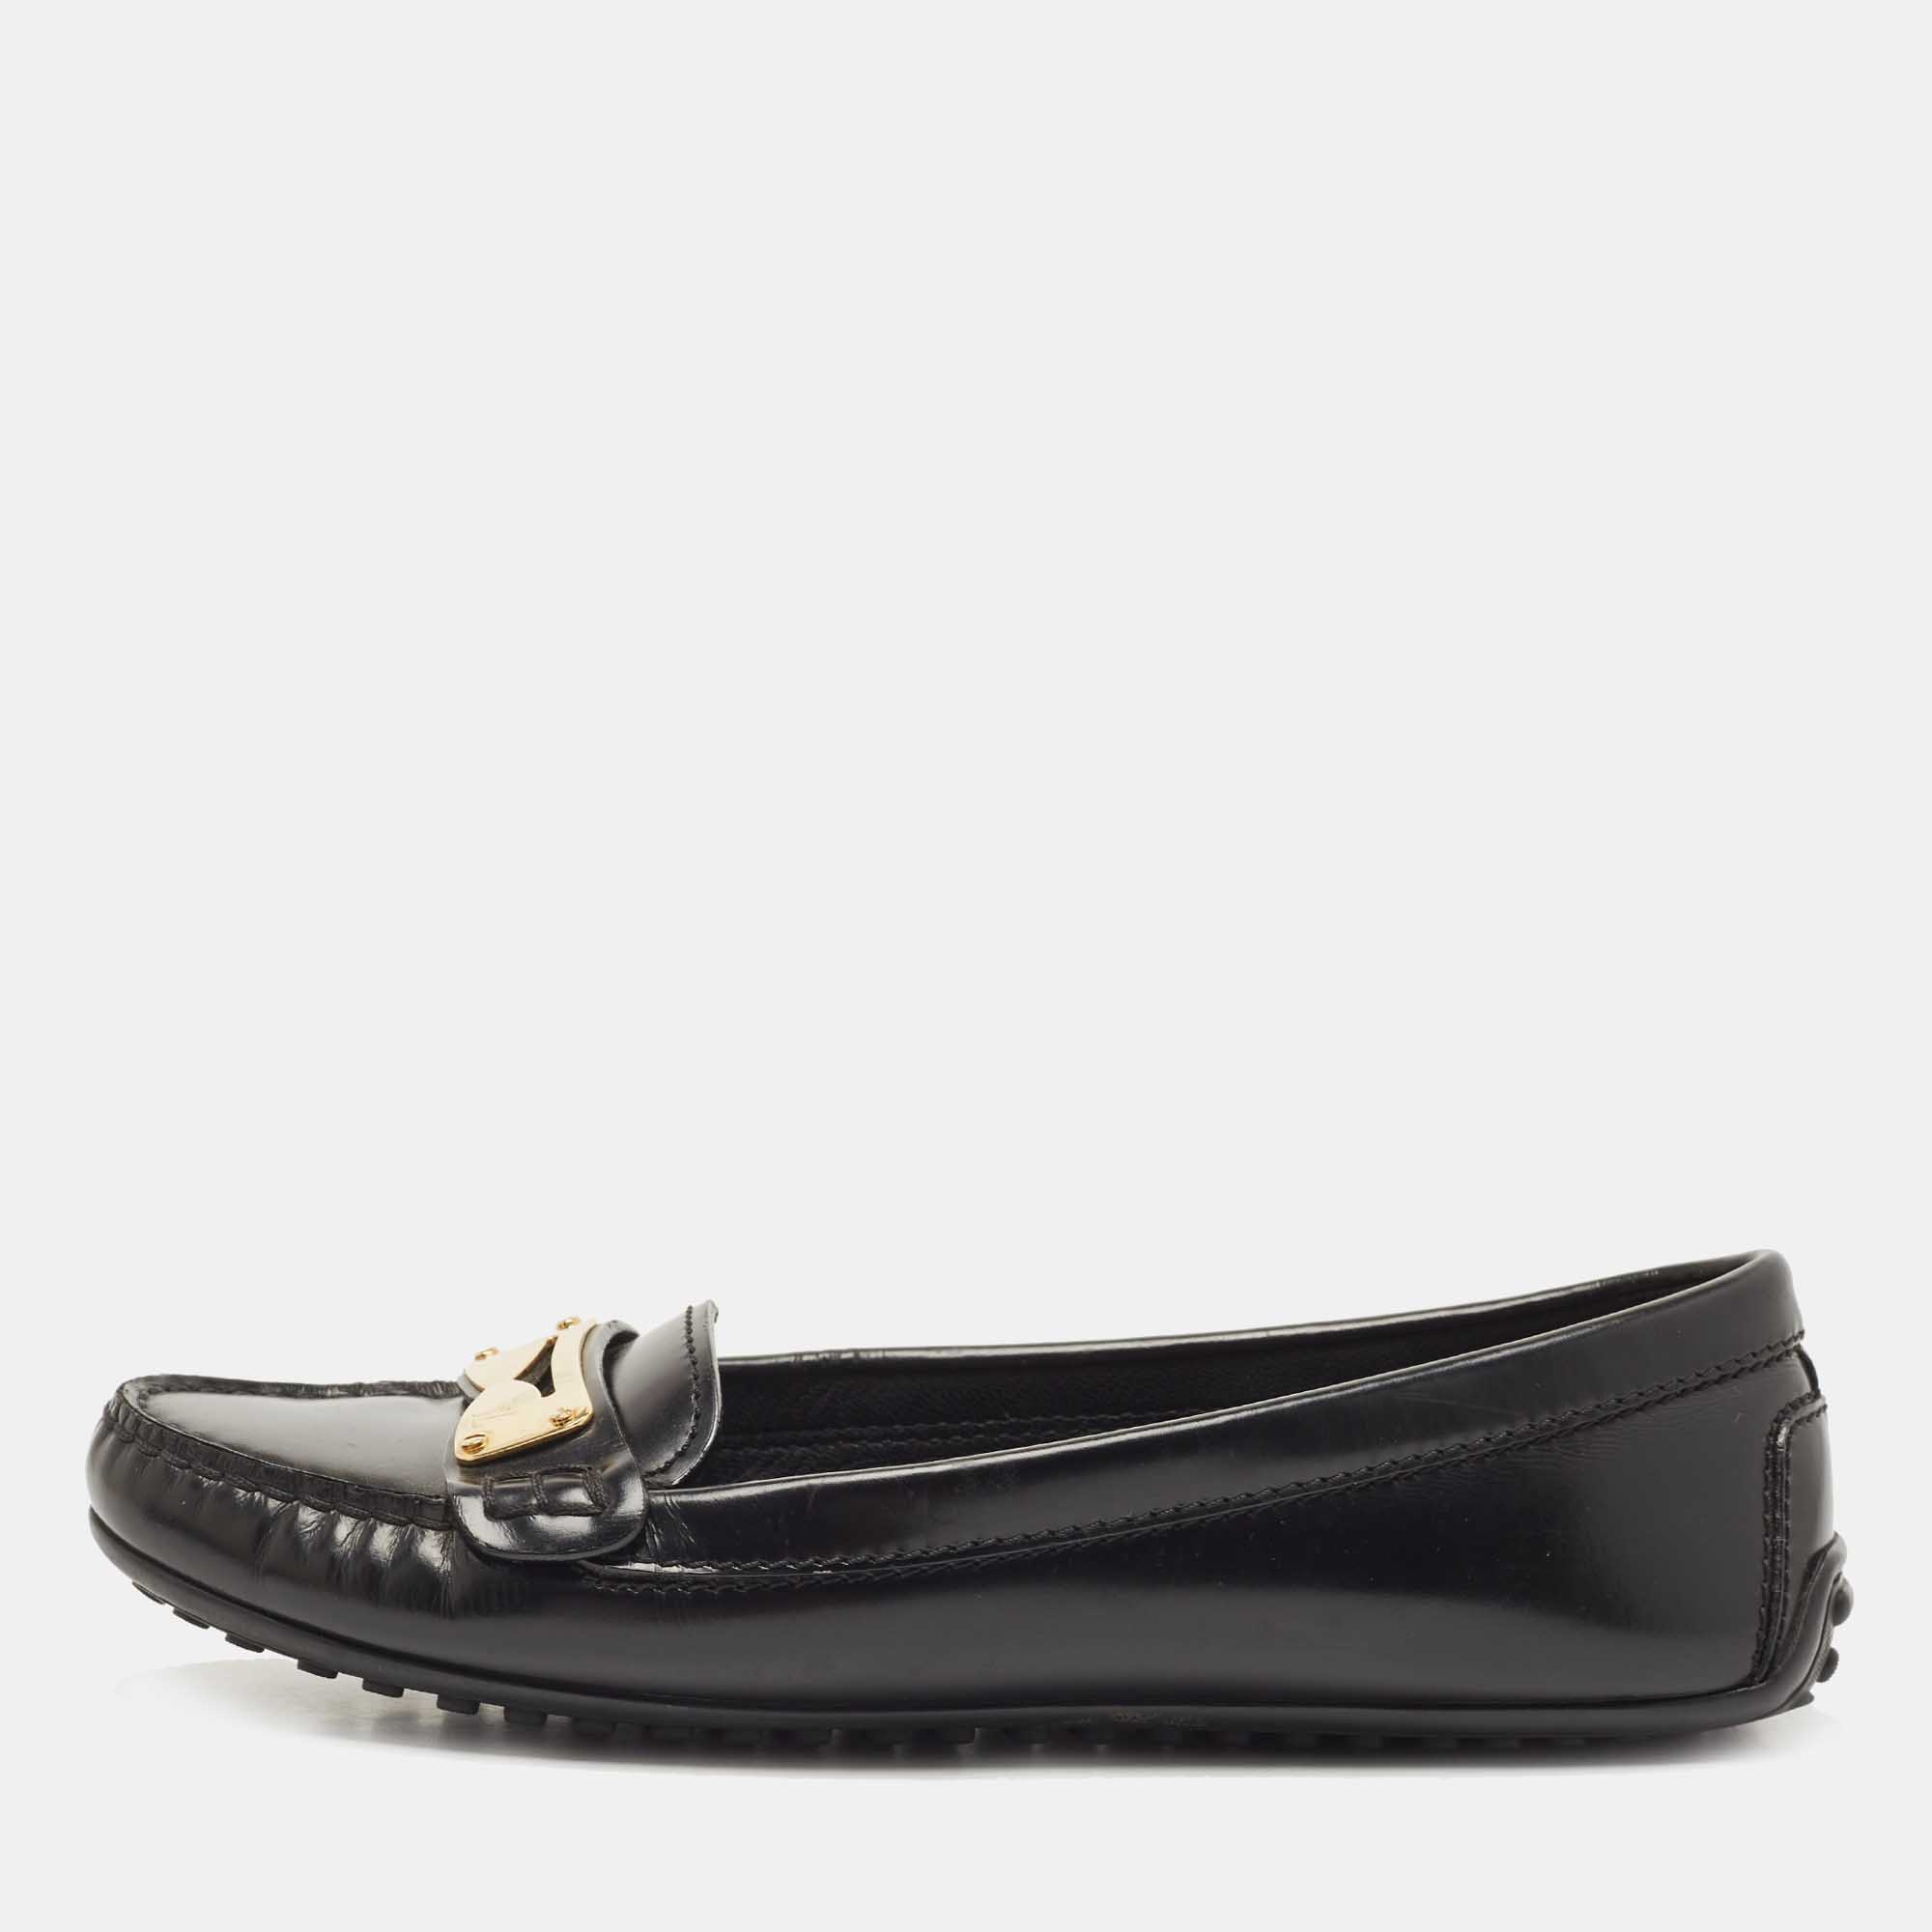 Louis Vuitton Black Leather Lombok Slip on Loafers Size 40.5